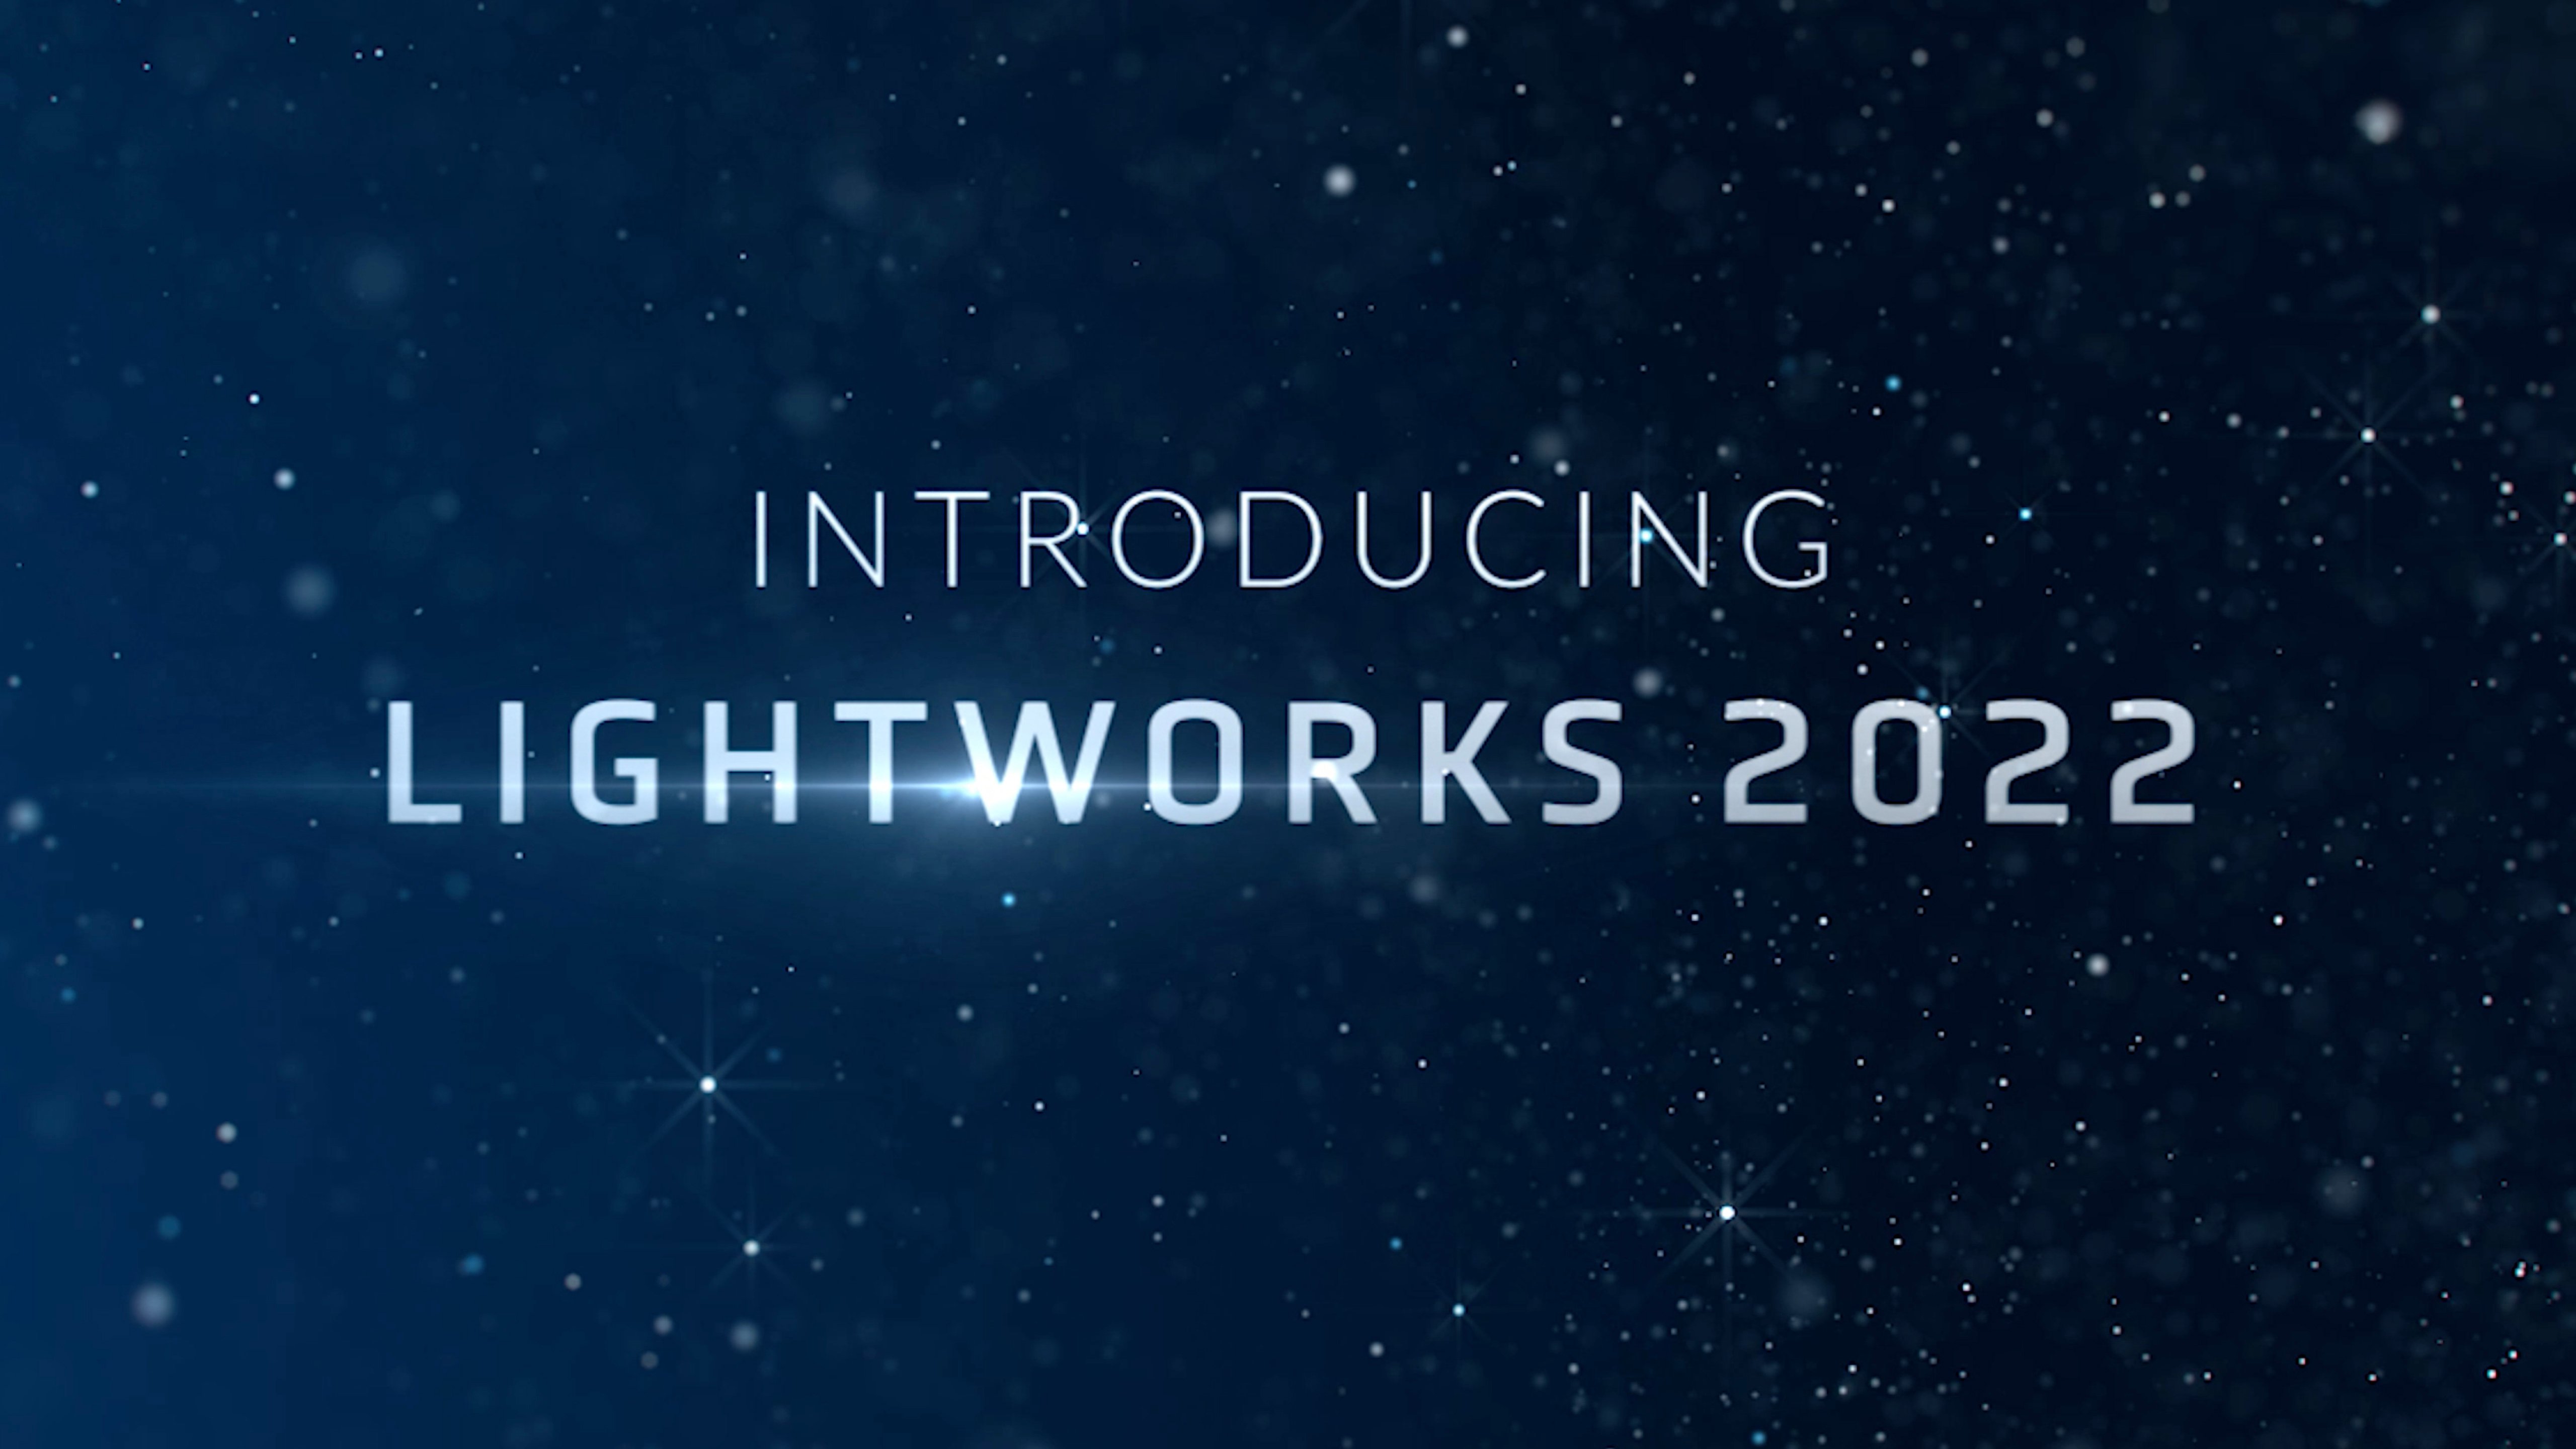 Introducing Lightworks 2022